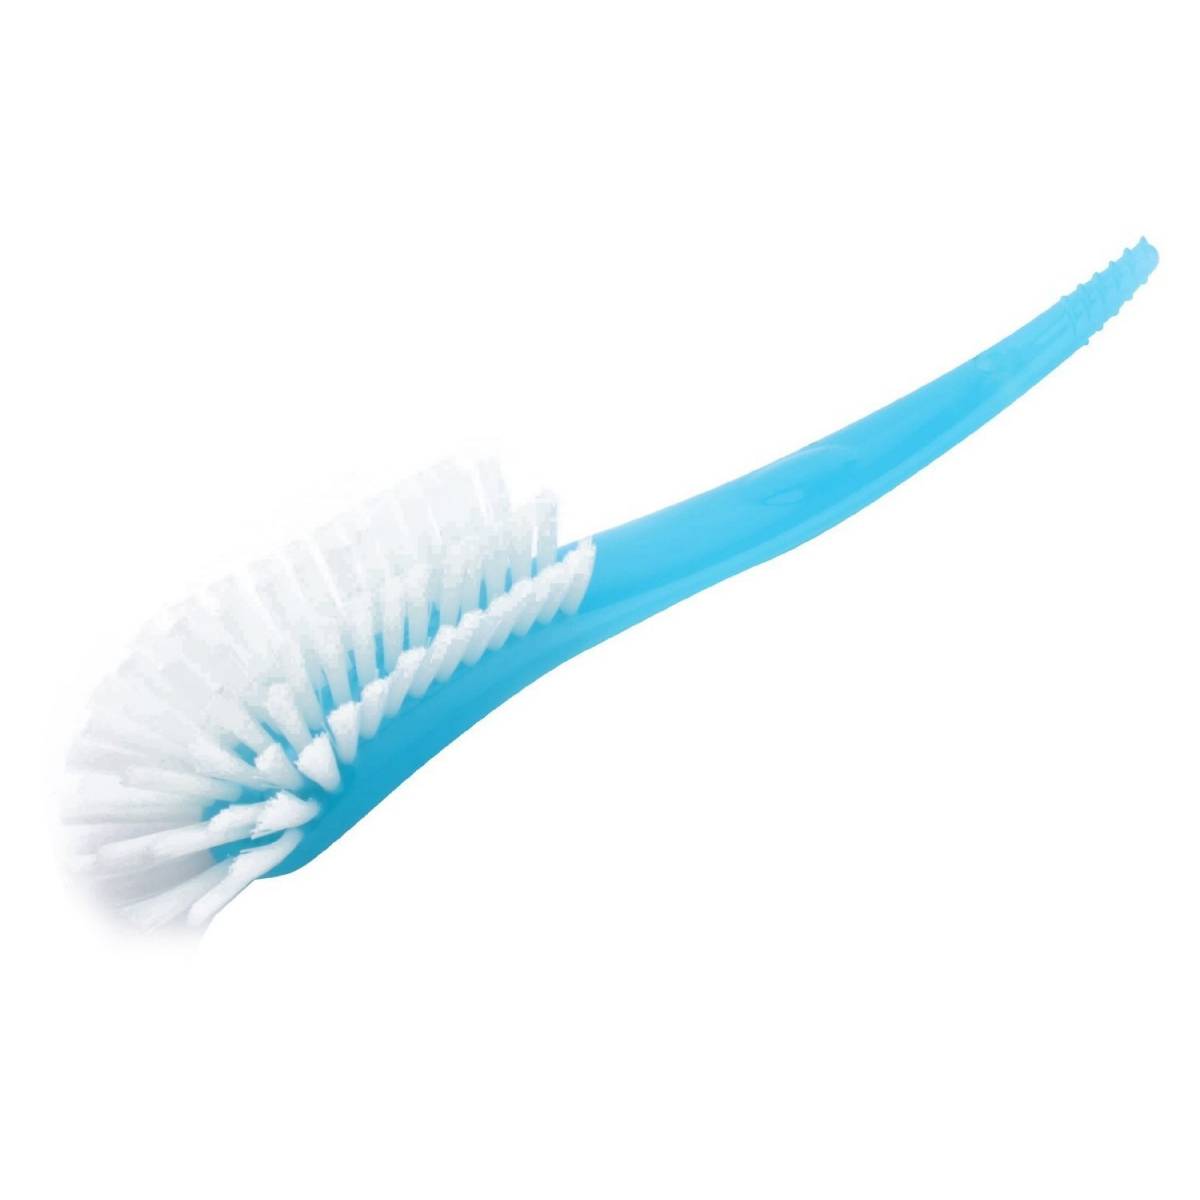 https://www.maxxidiscount.com/1710-large_default/span-translatenophilips-avent-span-bottle-brush-and-pacifier-blue.jpg